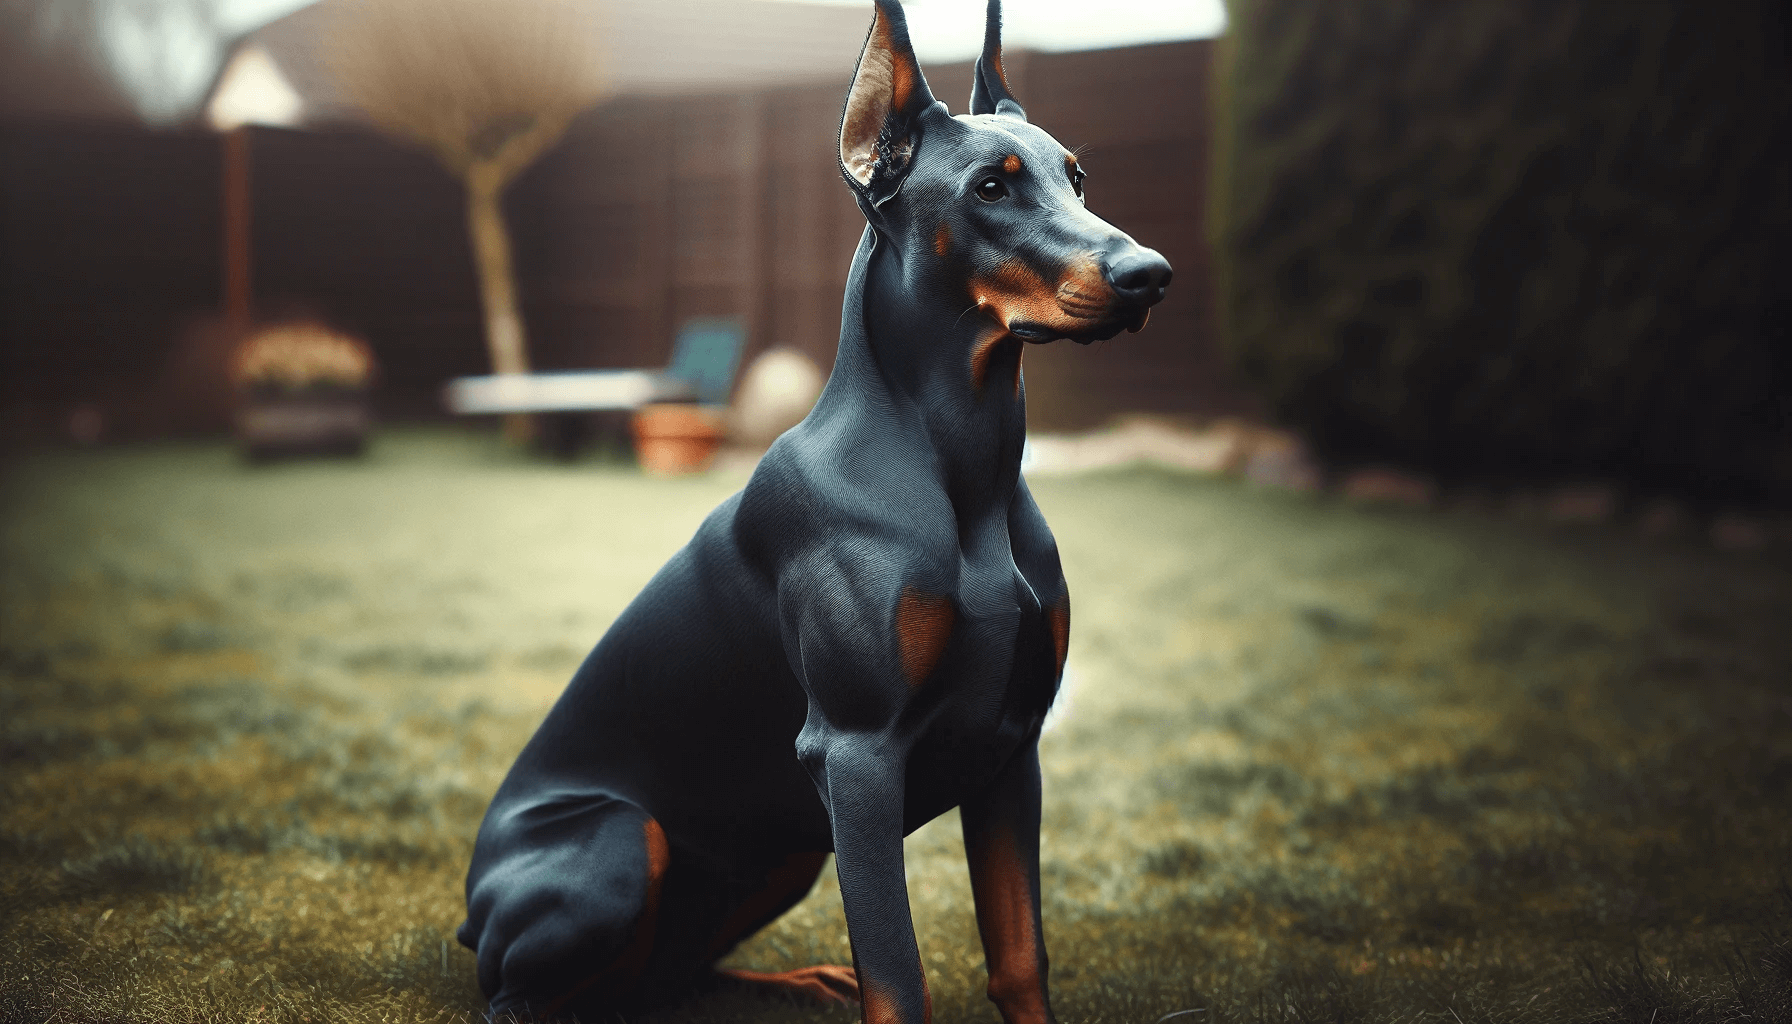 A Blue Doberman sitting upright in a yard with its ears perked up and attention focused, possibly on its owner or an interesting object.